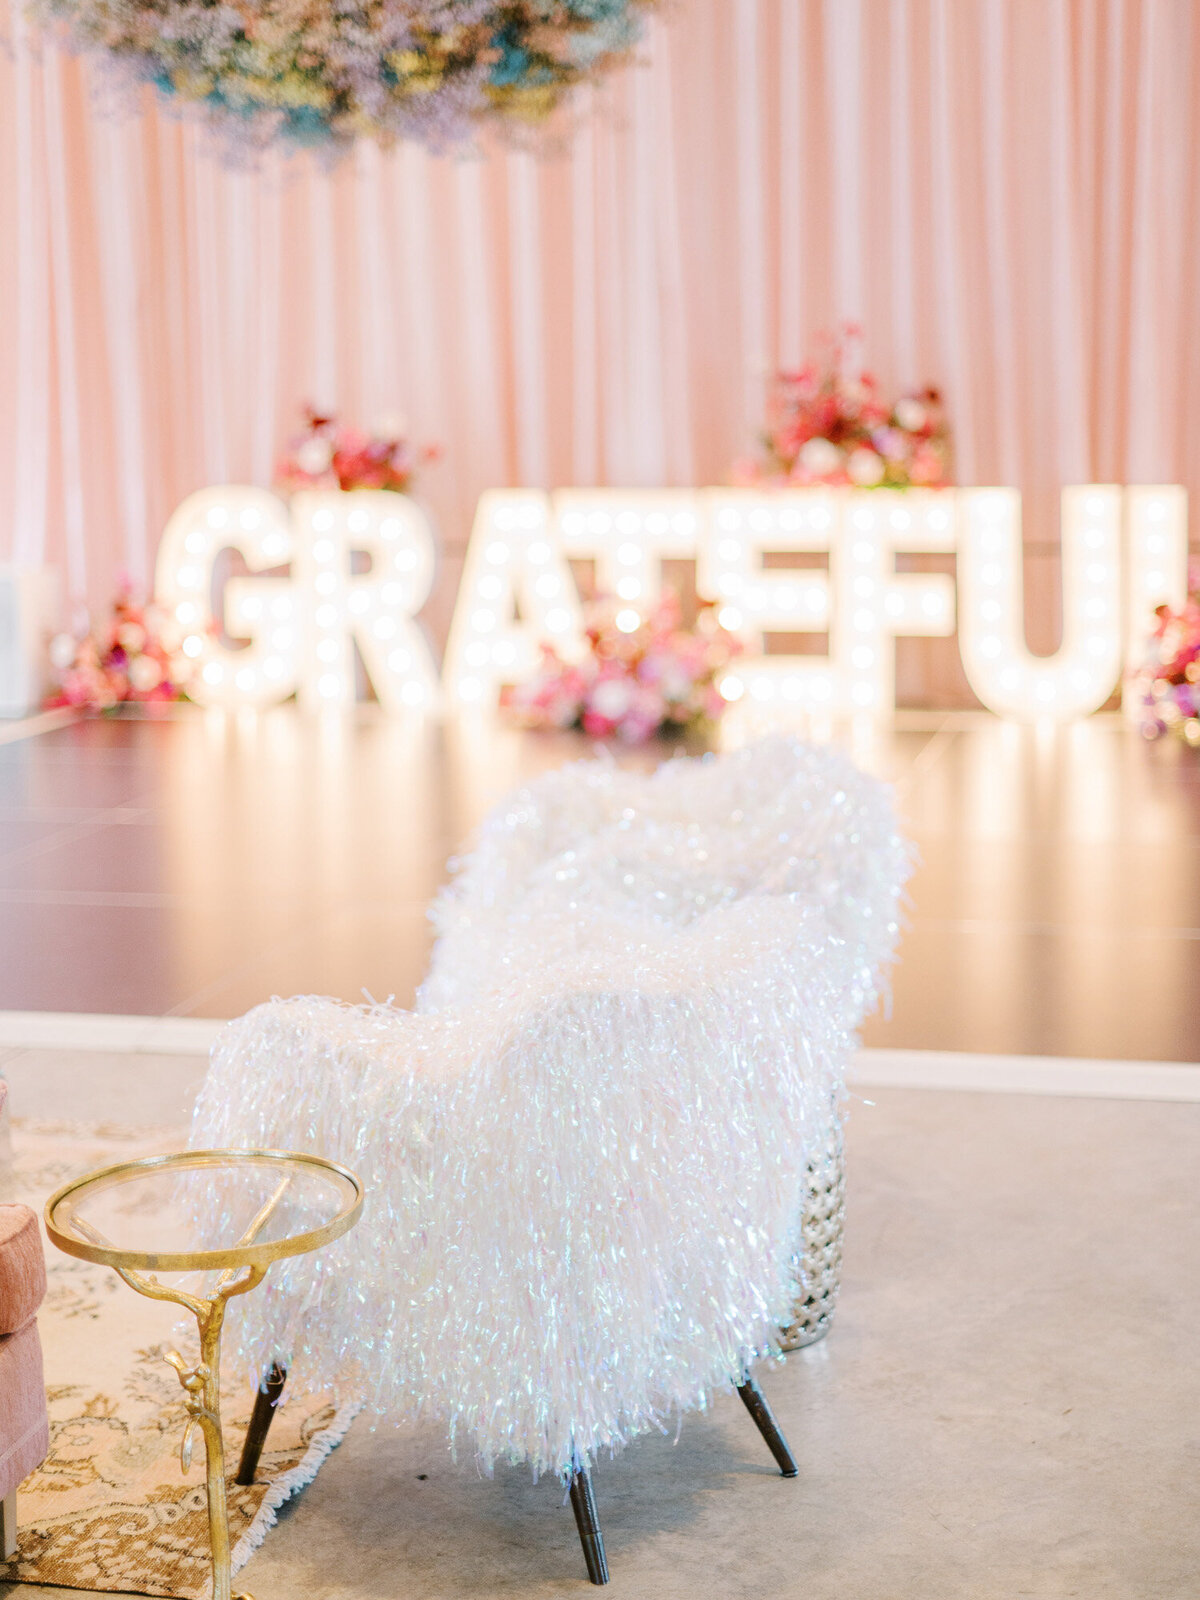 Grateful lit letters and an elegant white fur chair